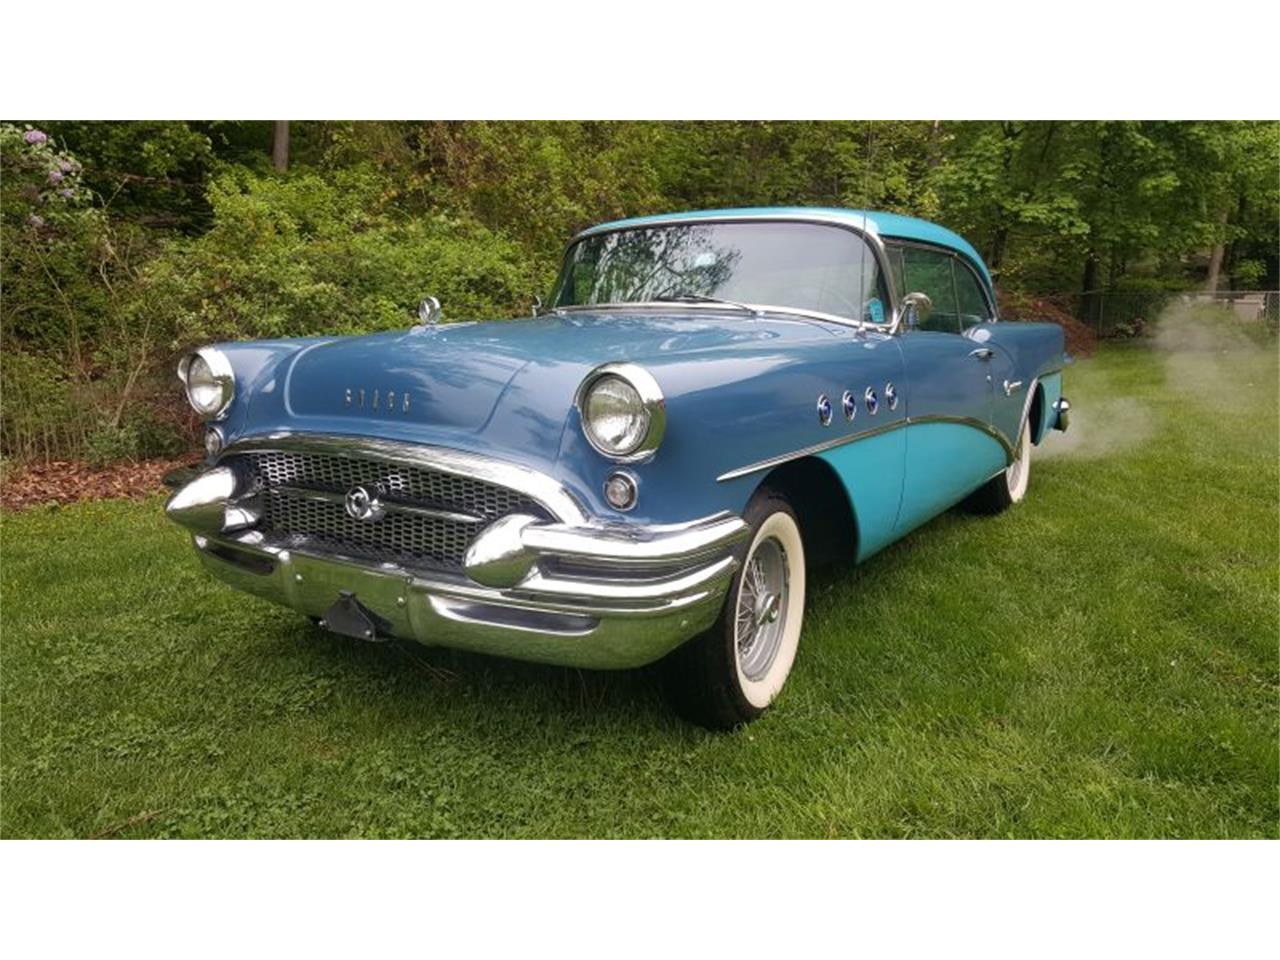 1955 buick century for sale classiccars com cc 1100019 1955 buick century for sale